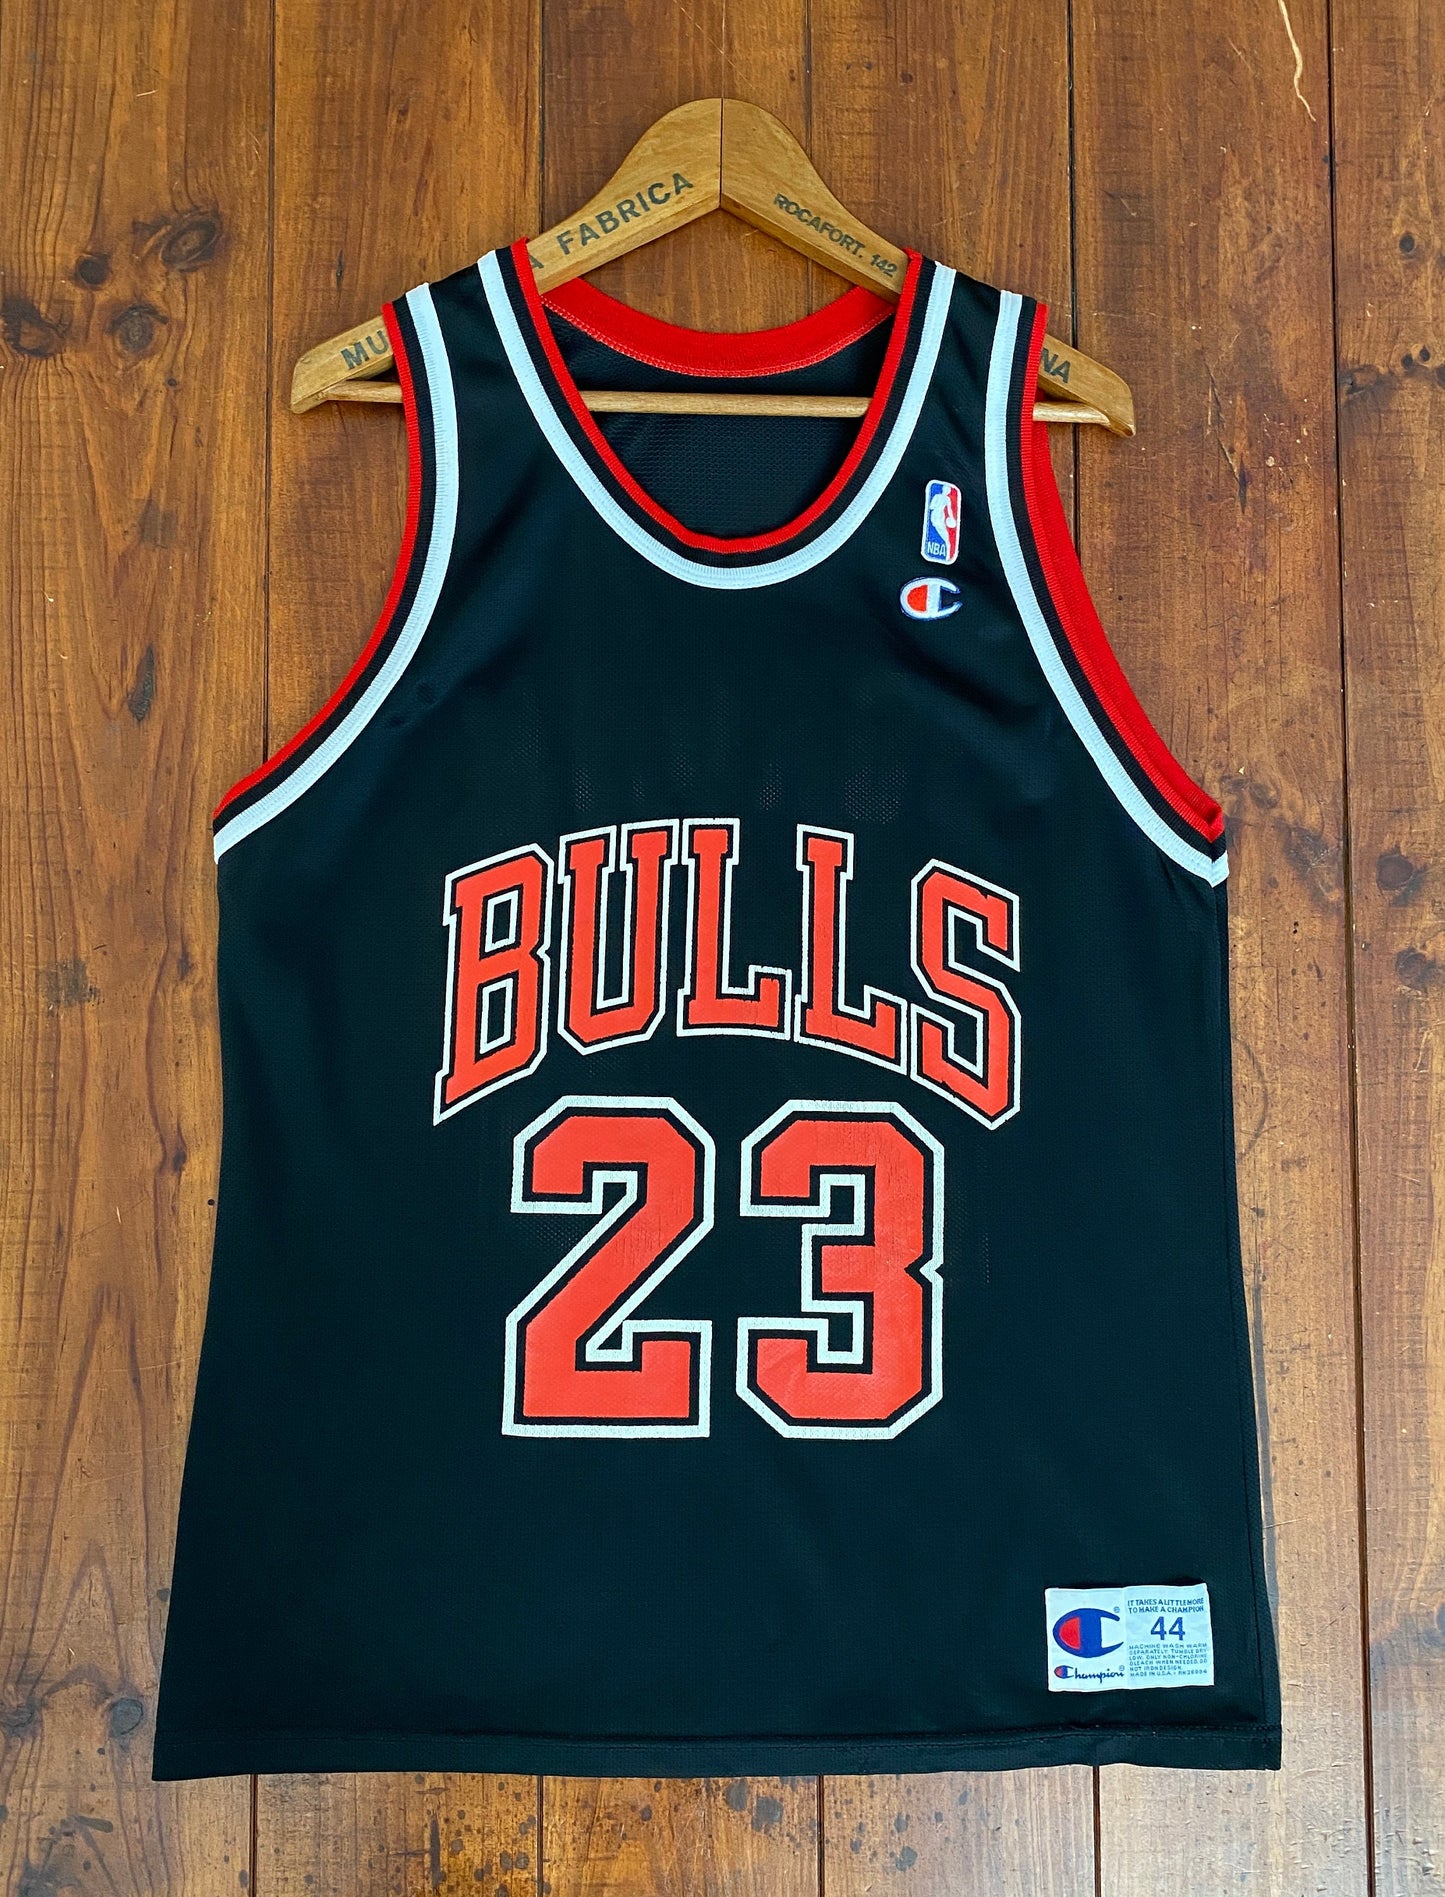 Size 44. Vintage 90s NBA Jordan Jersey Chicago Bulls #23 NBA Made In USA by Champion